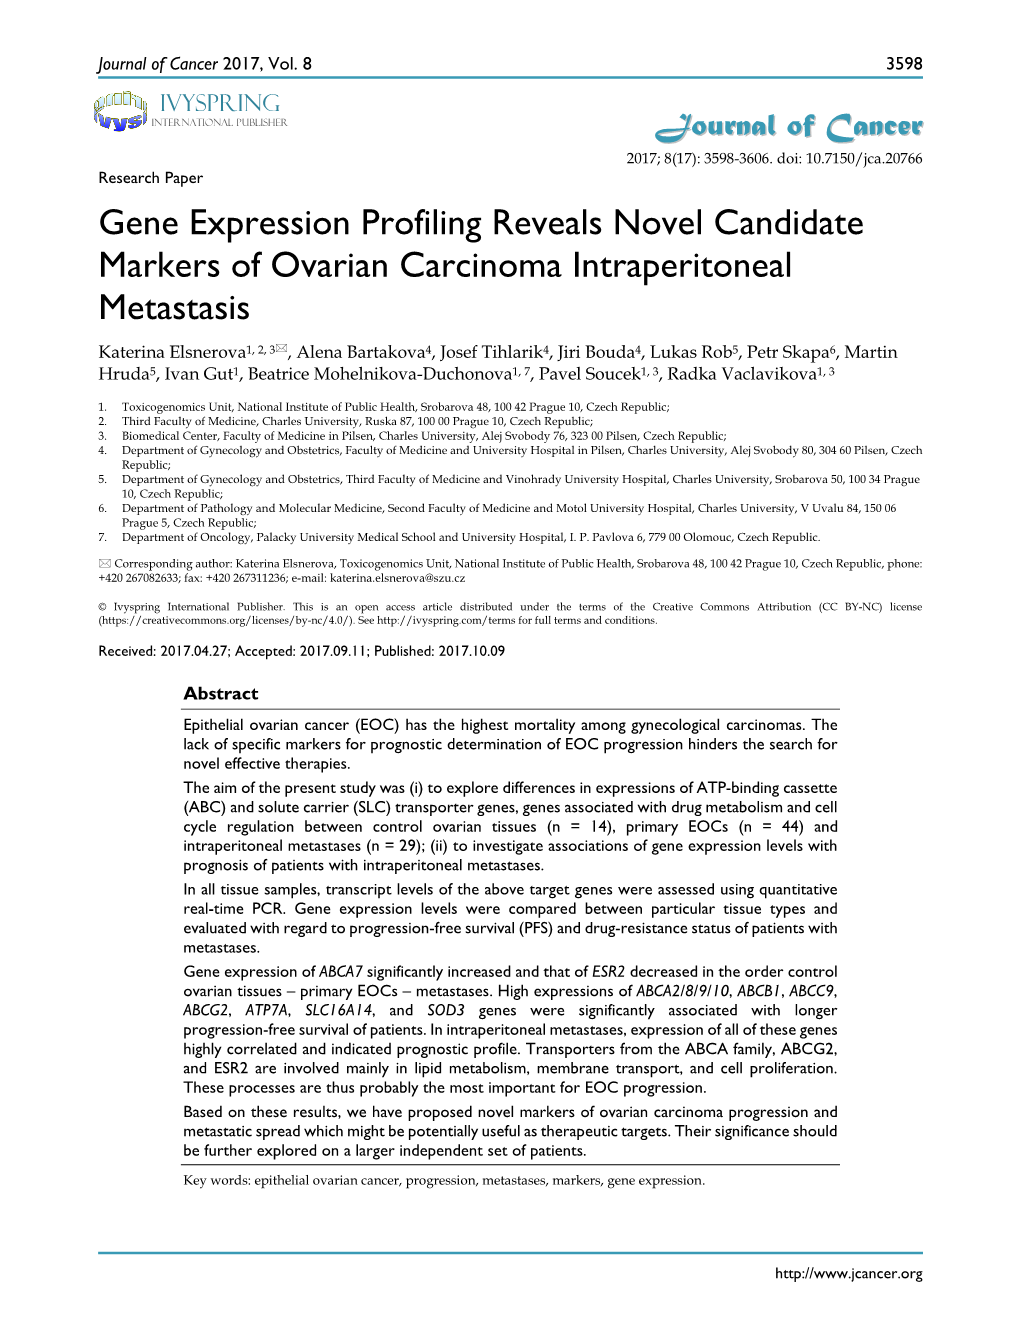 Gene Expression Profiling Reveals Novel Candidate Markers Of